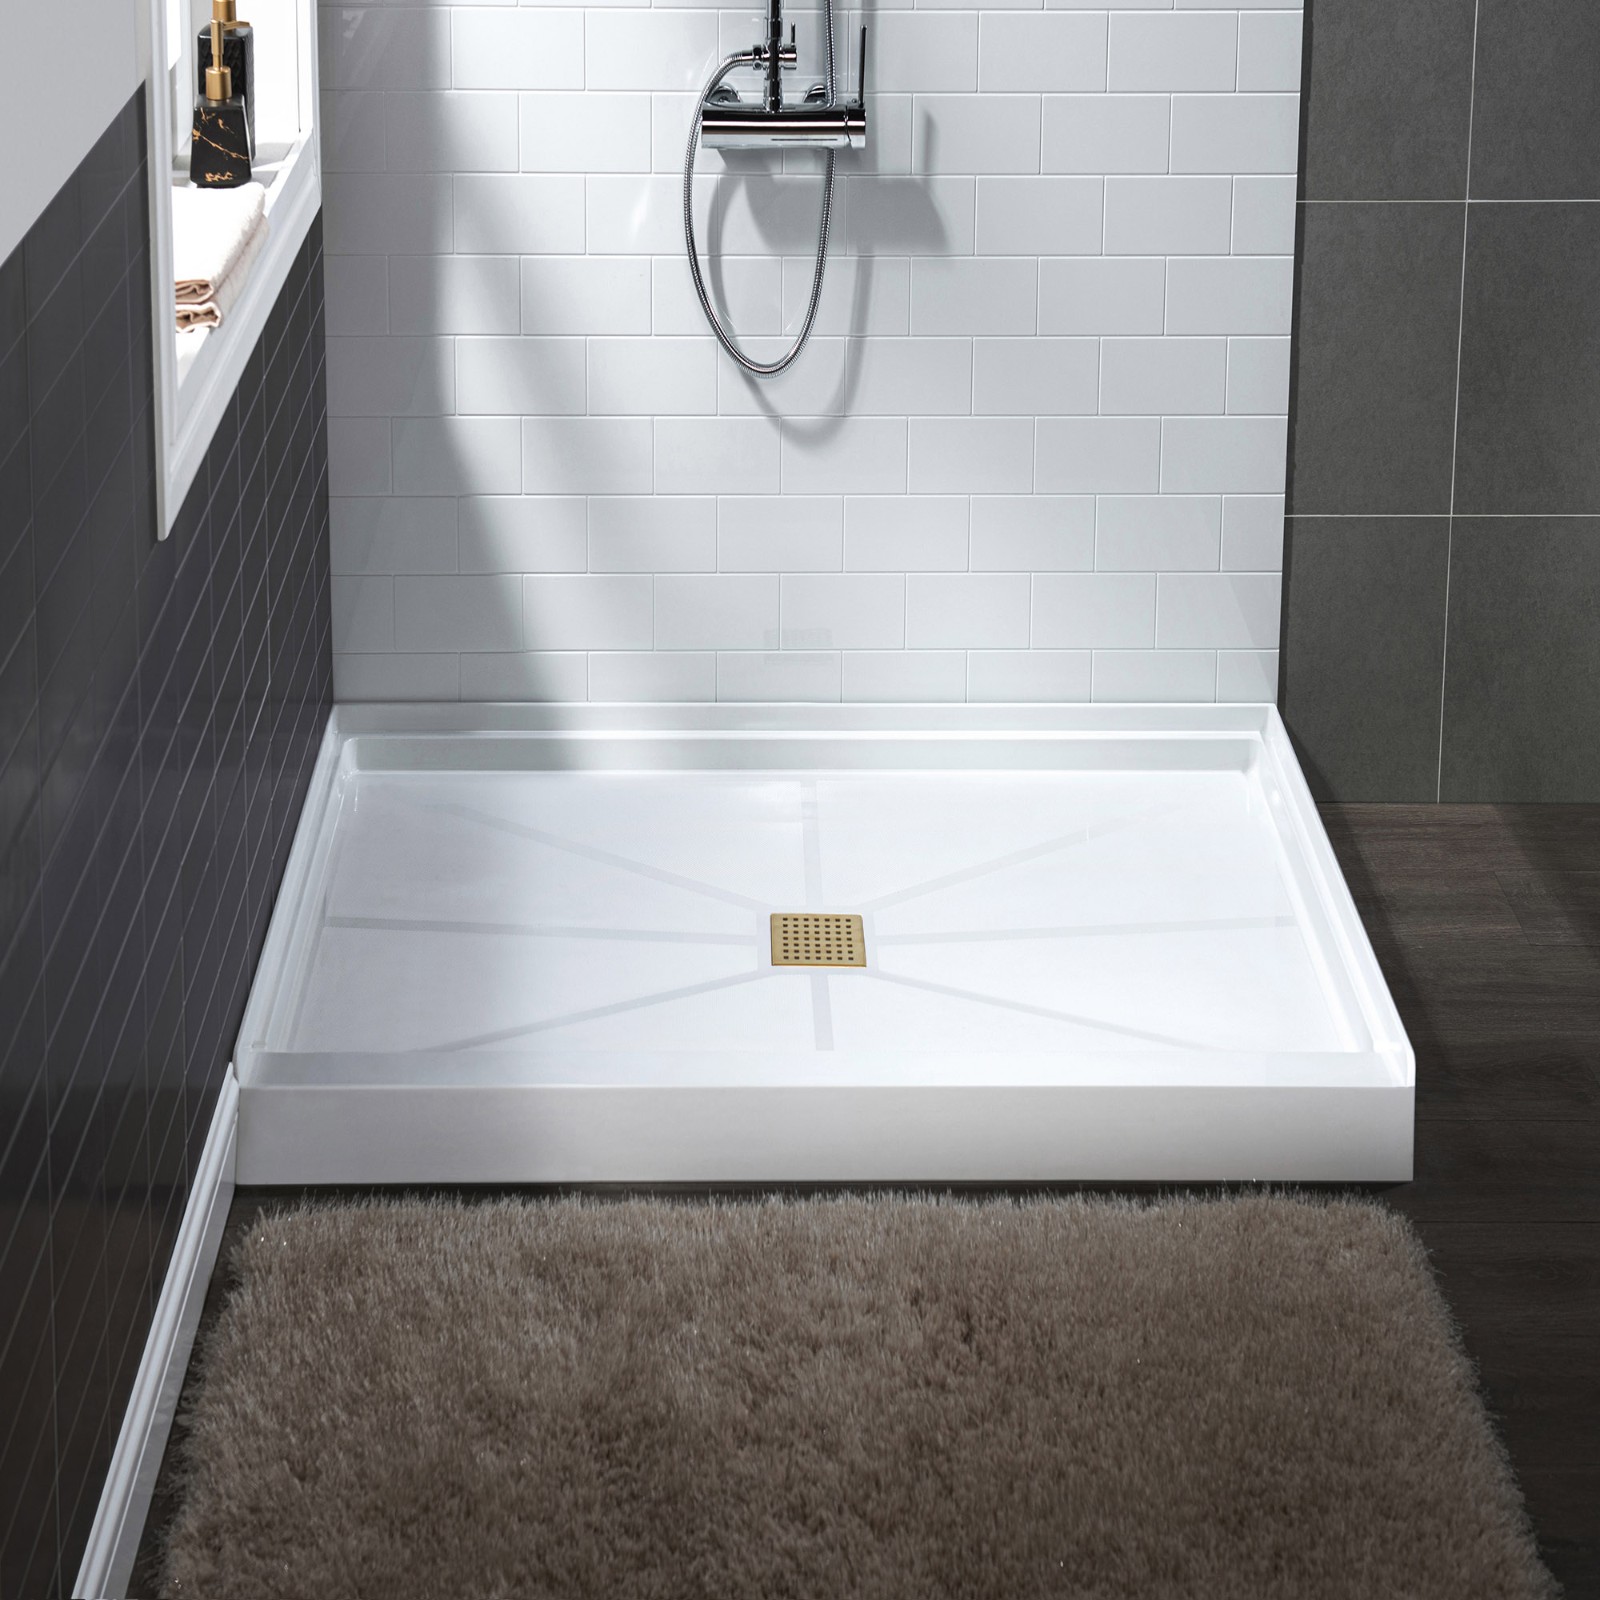  WOODBRIDGE SBR3636-1000C-BG SolidSurface Shower Base with Recessed Trench Side Including Brushed Gold Linear Cover, 36